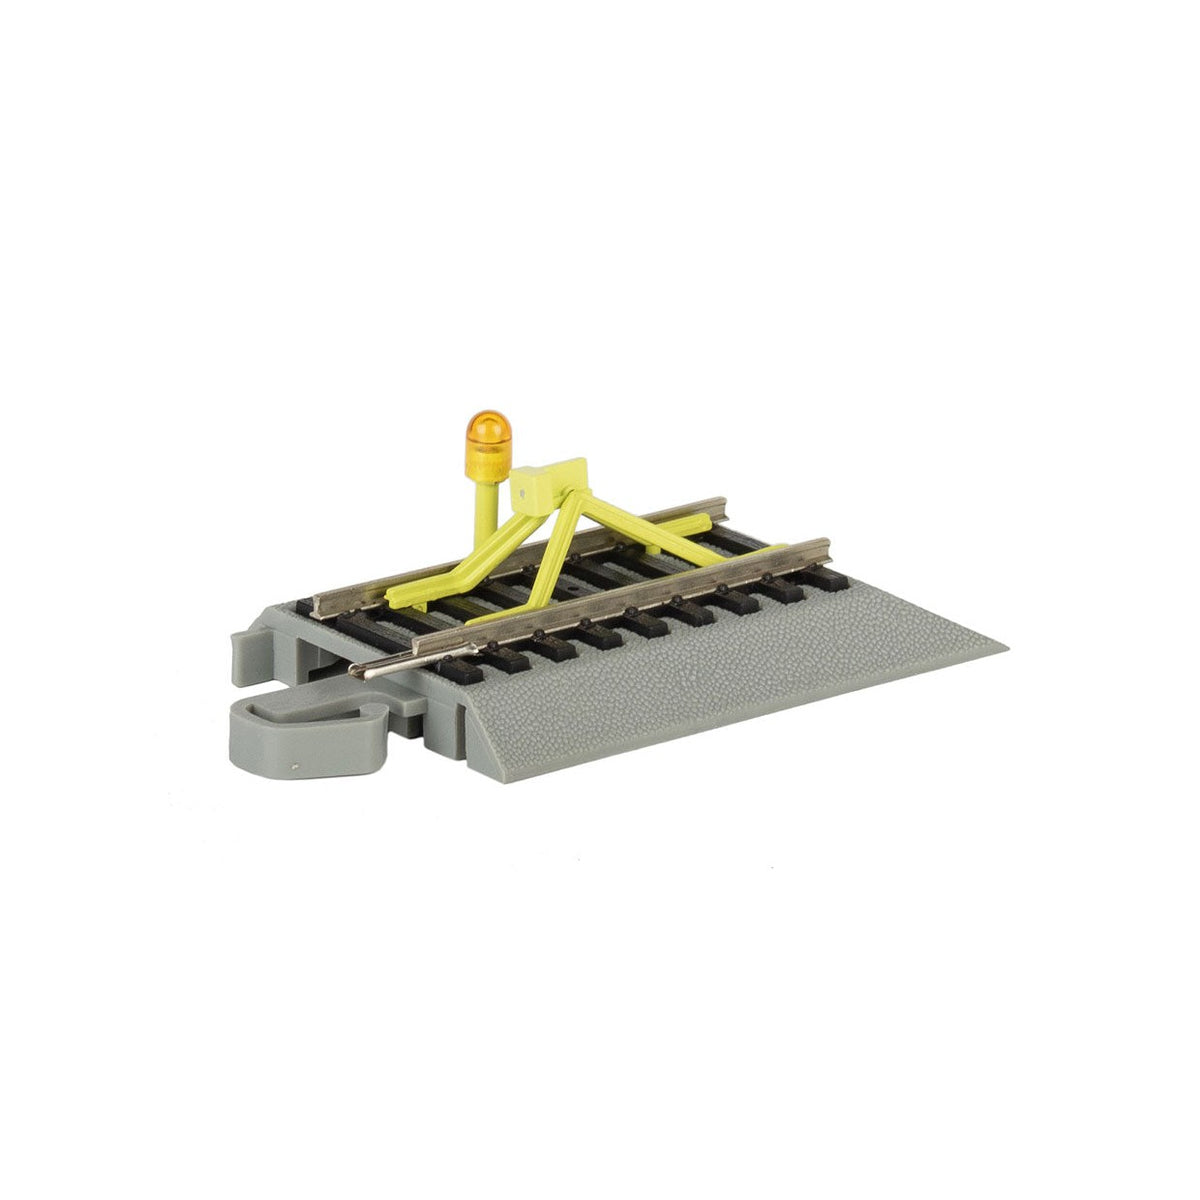 Bachmann 44593 - HO Scale - Nickel Silver Rail & Gray Roadbed - E-Z Track(R) - Track Bumper with Flashing LED